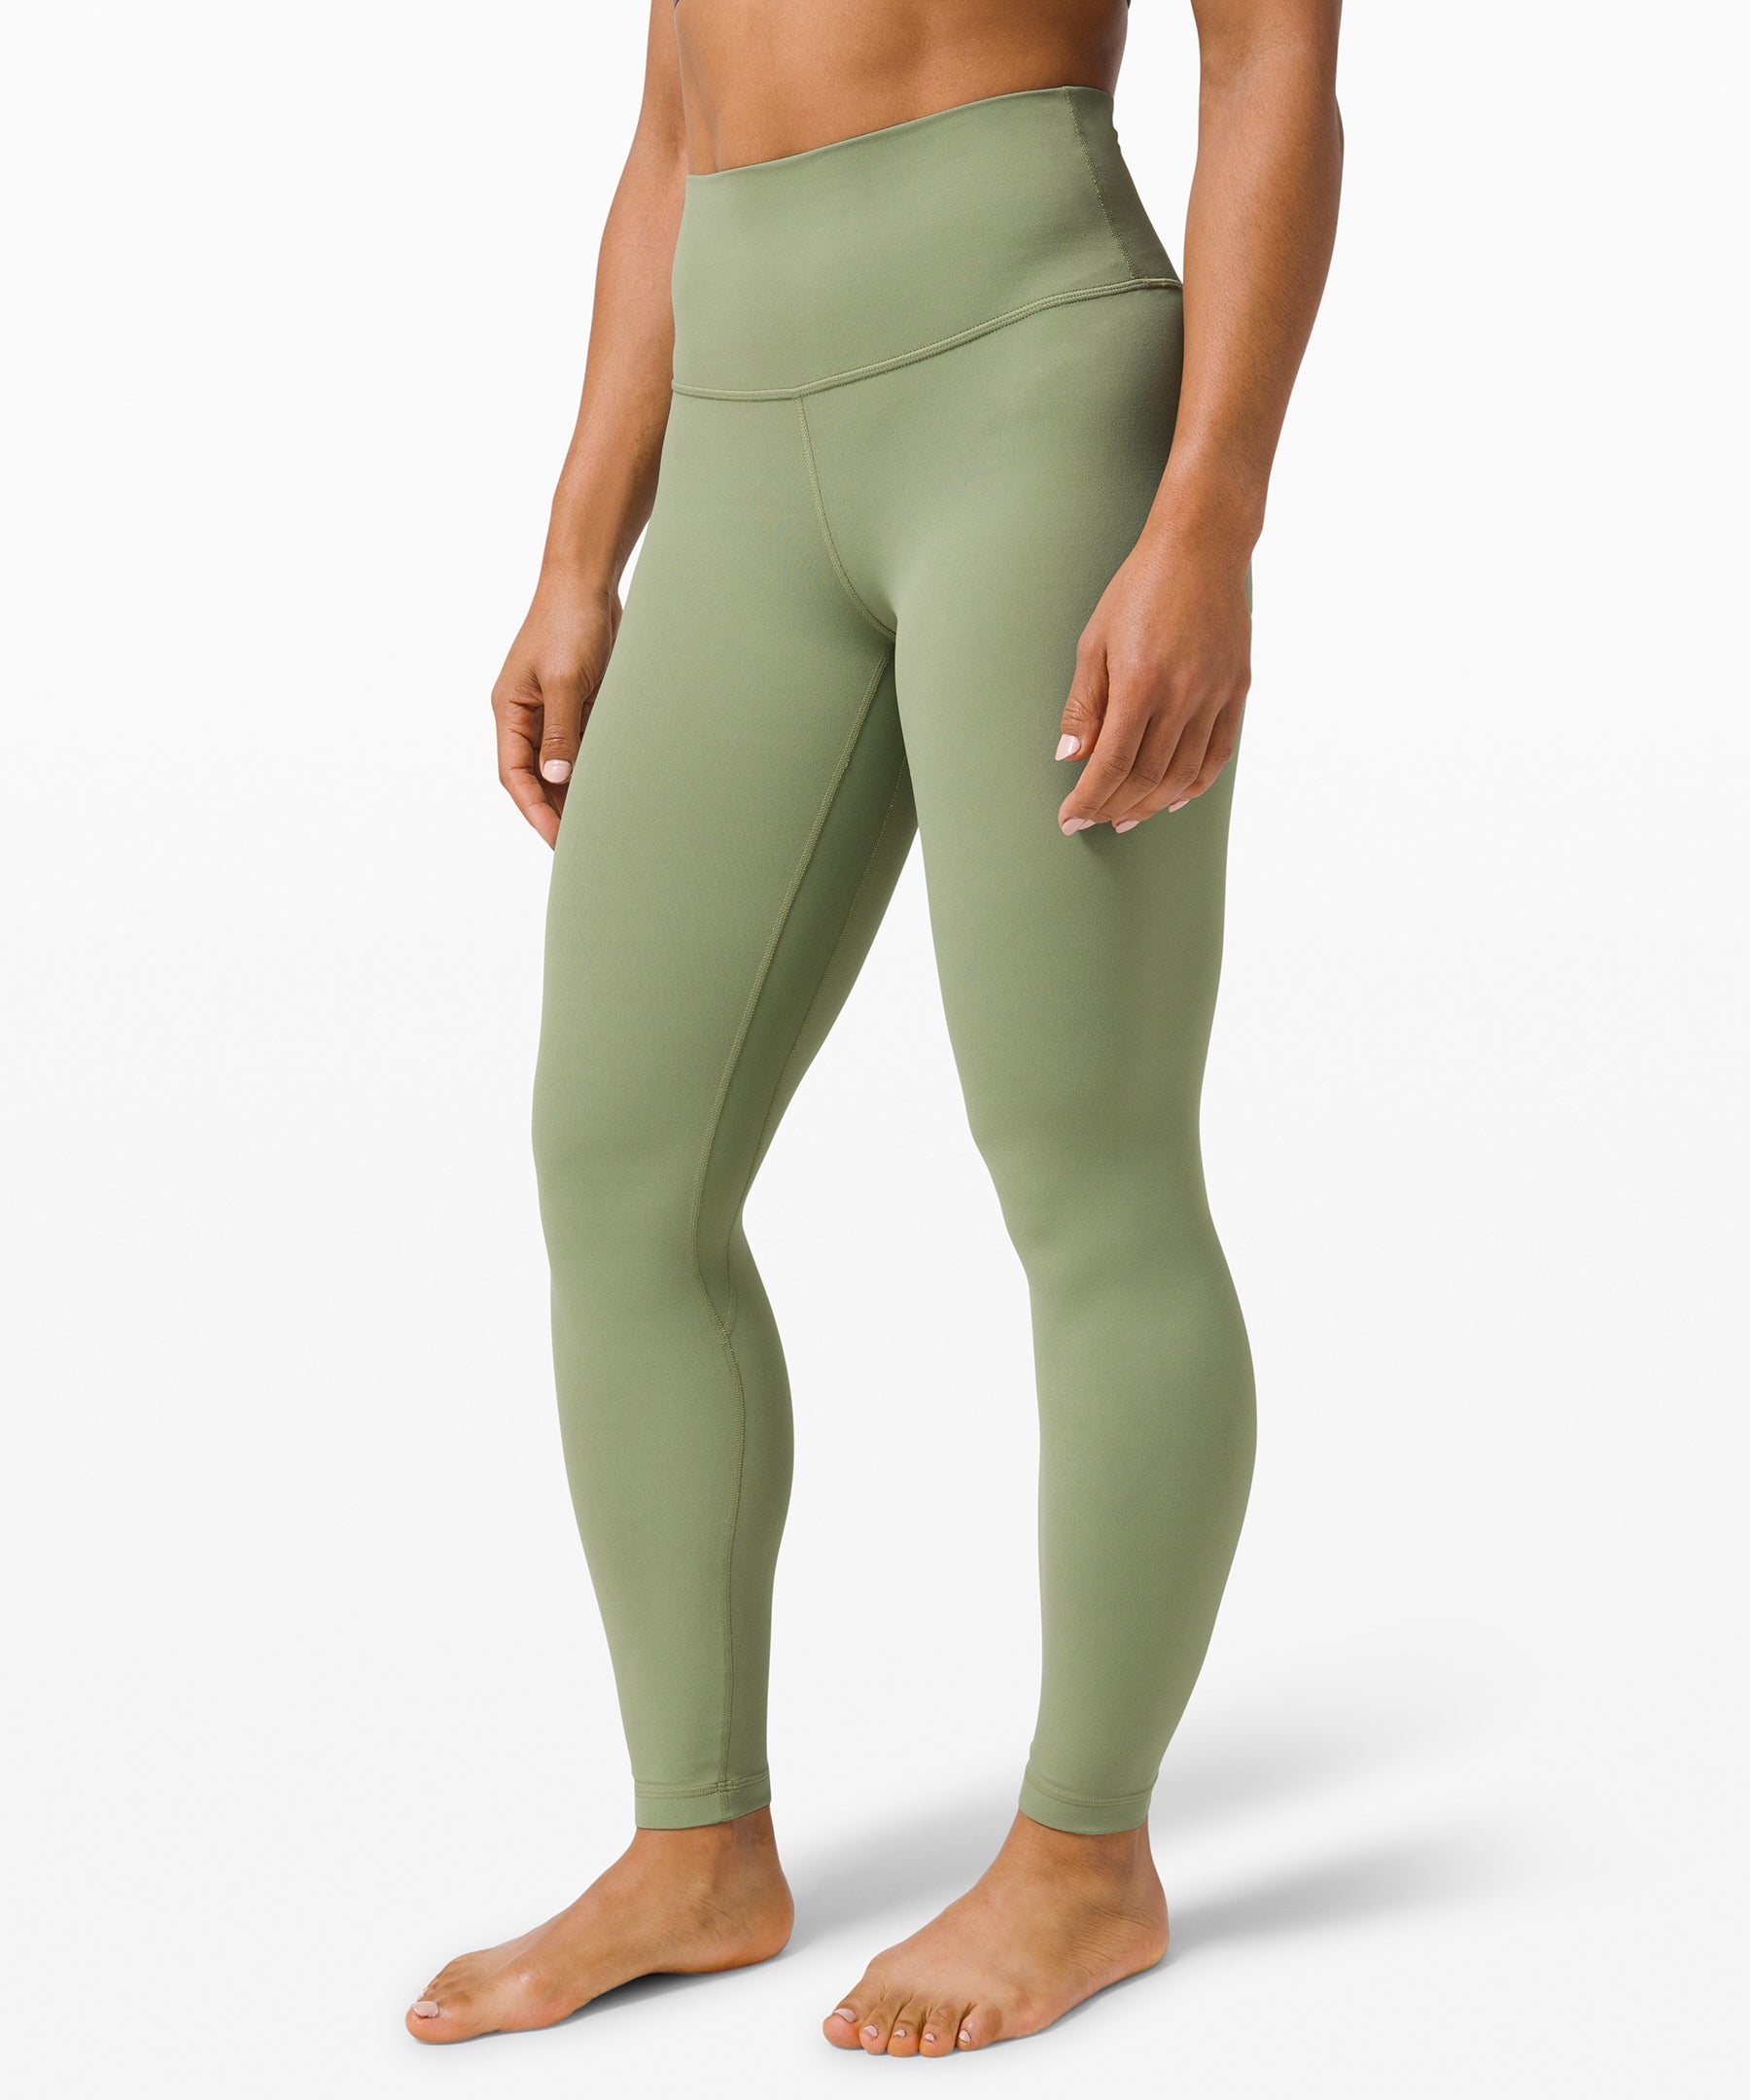 Align Pants Lululemon Reviews Group  International Society of Precision  Agriculture